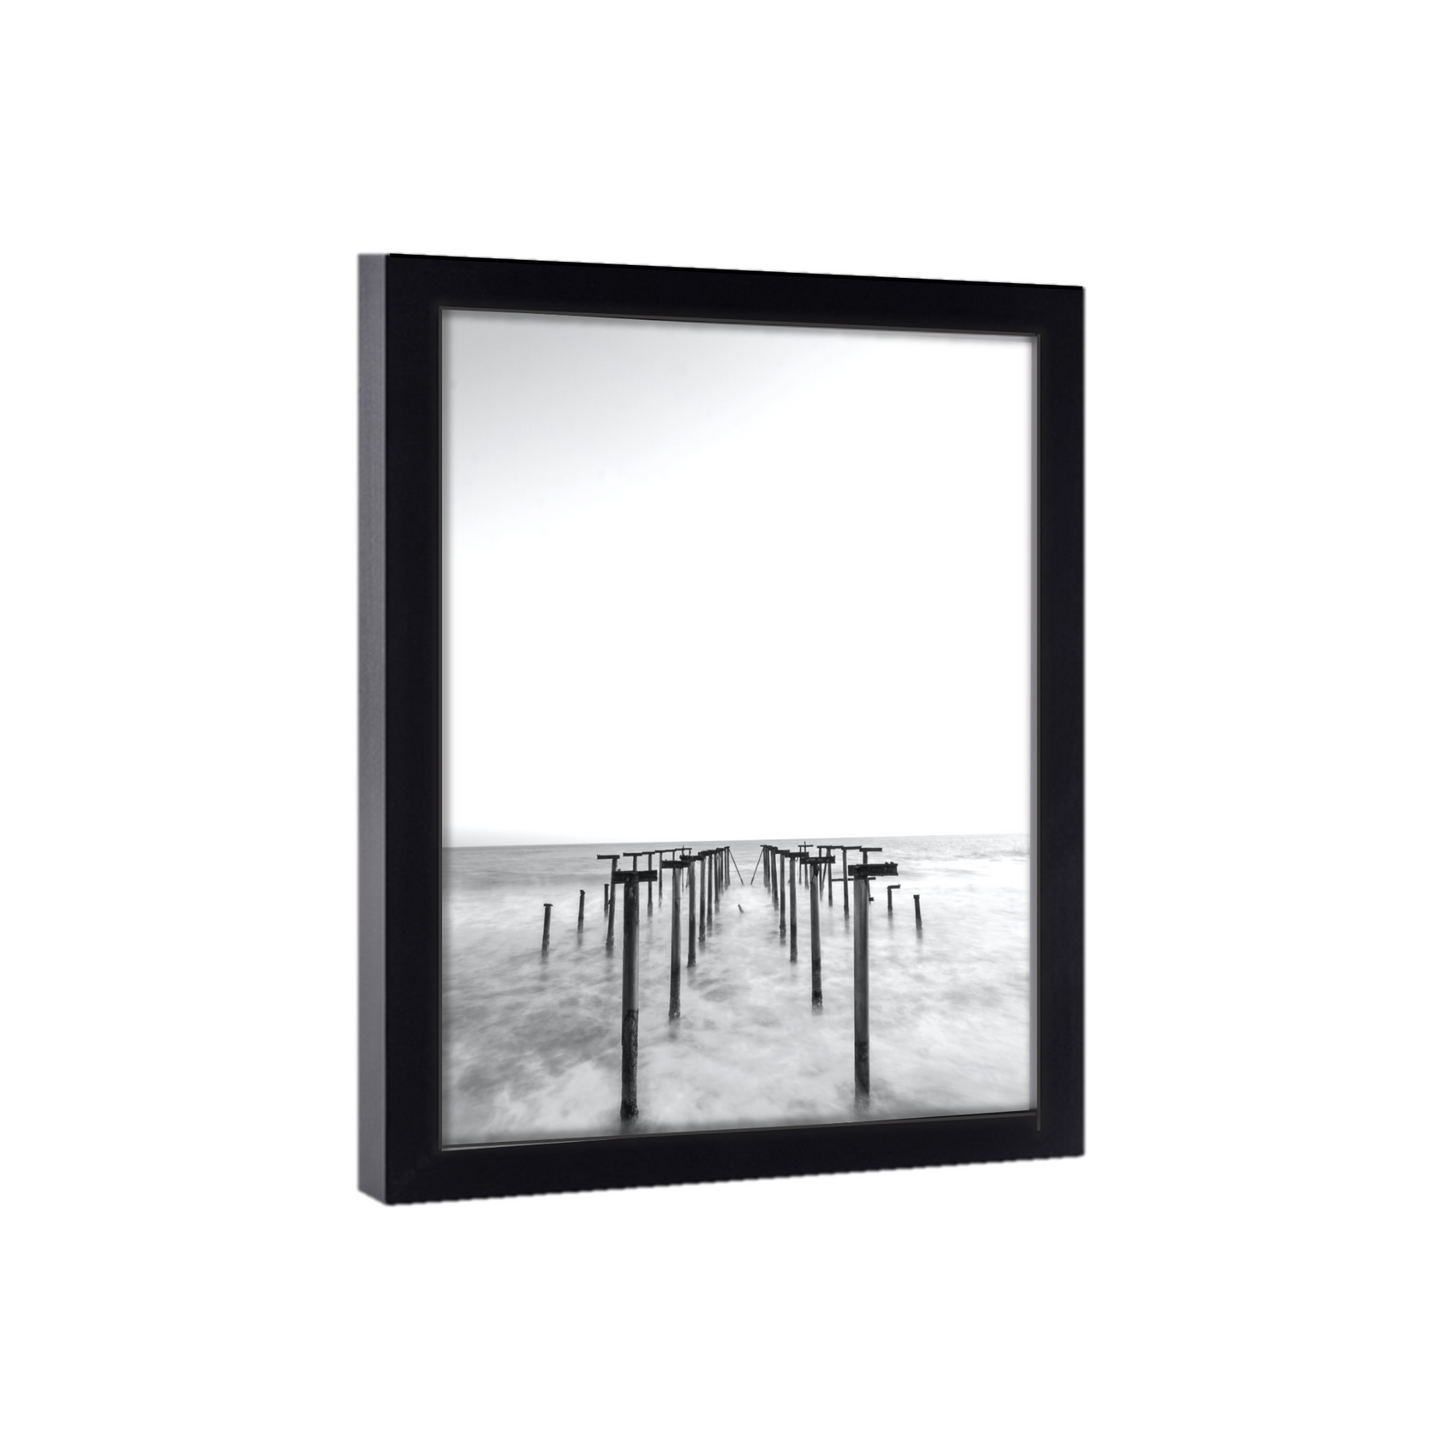 Gallery Wall 17x25 Picture Frame Black Wood 17x25  Poster Size